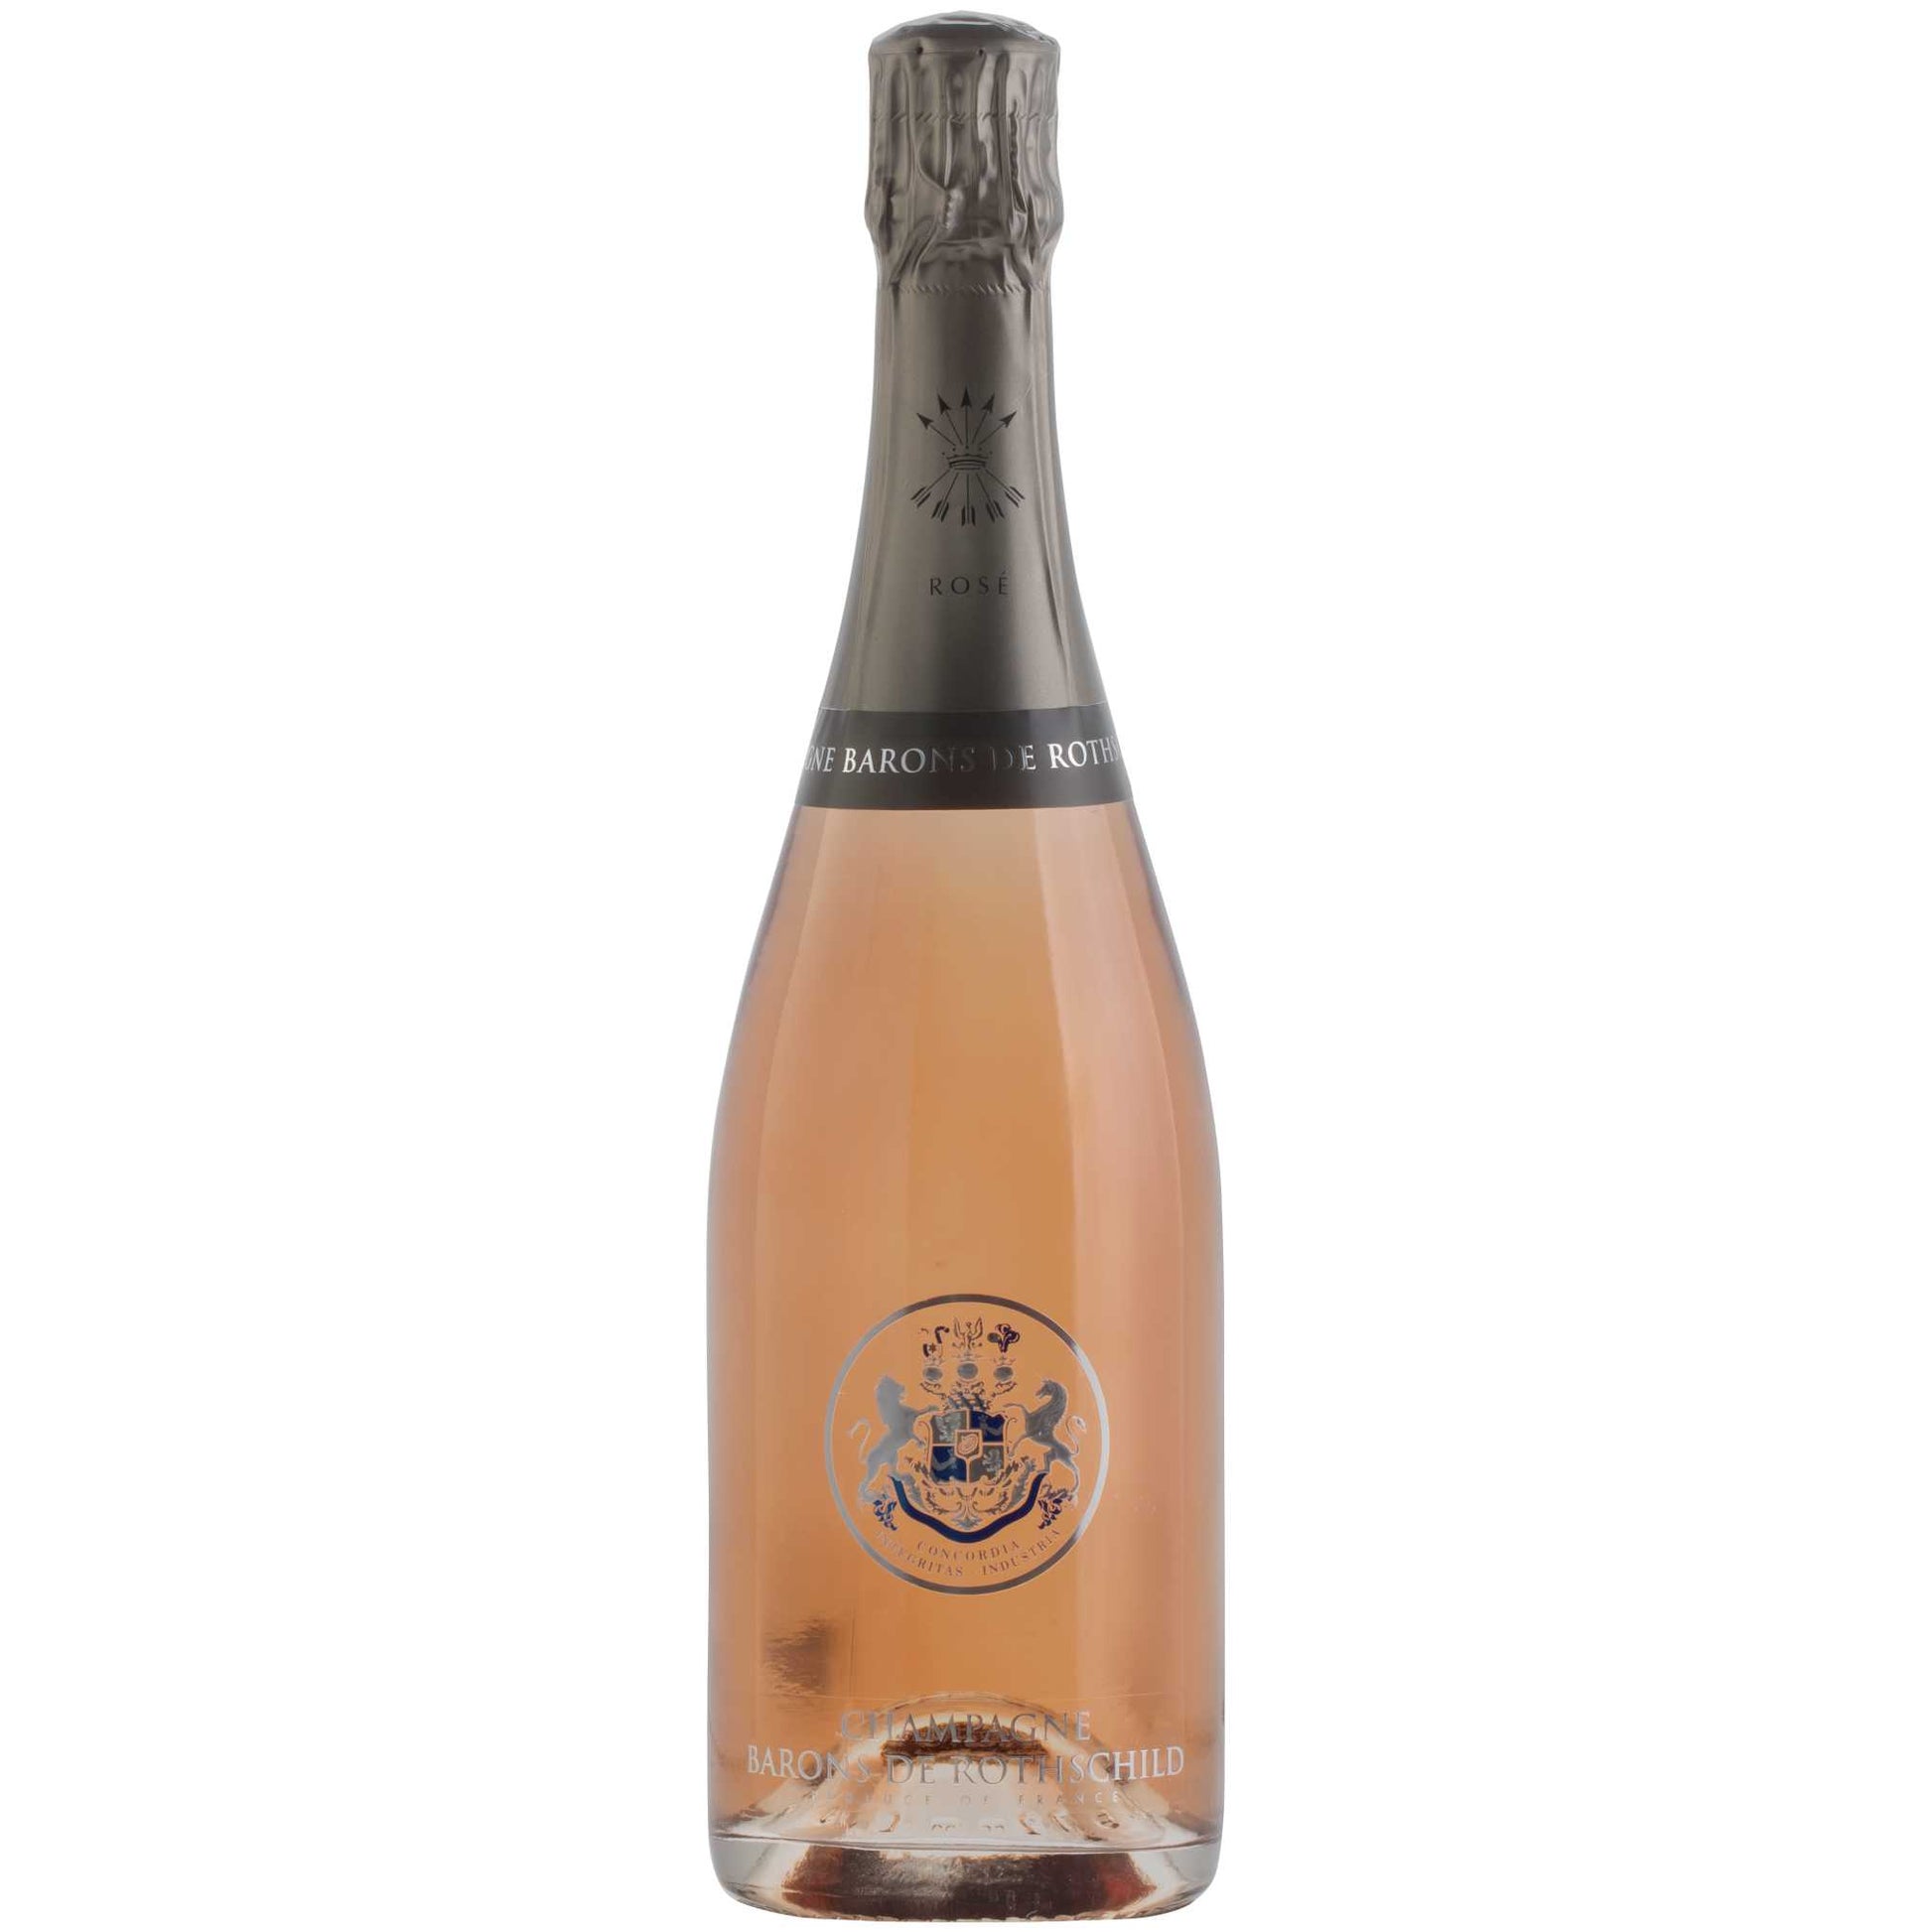 Barons de Rothschild Brut Champagne Rose with Gift Box-Champagne-Barons de Rothschild-Kosher Wine Warehouse